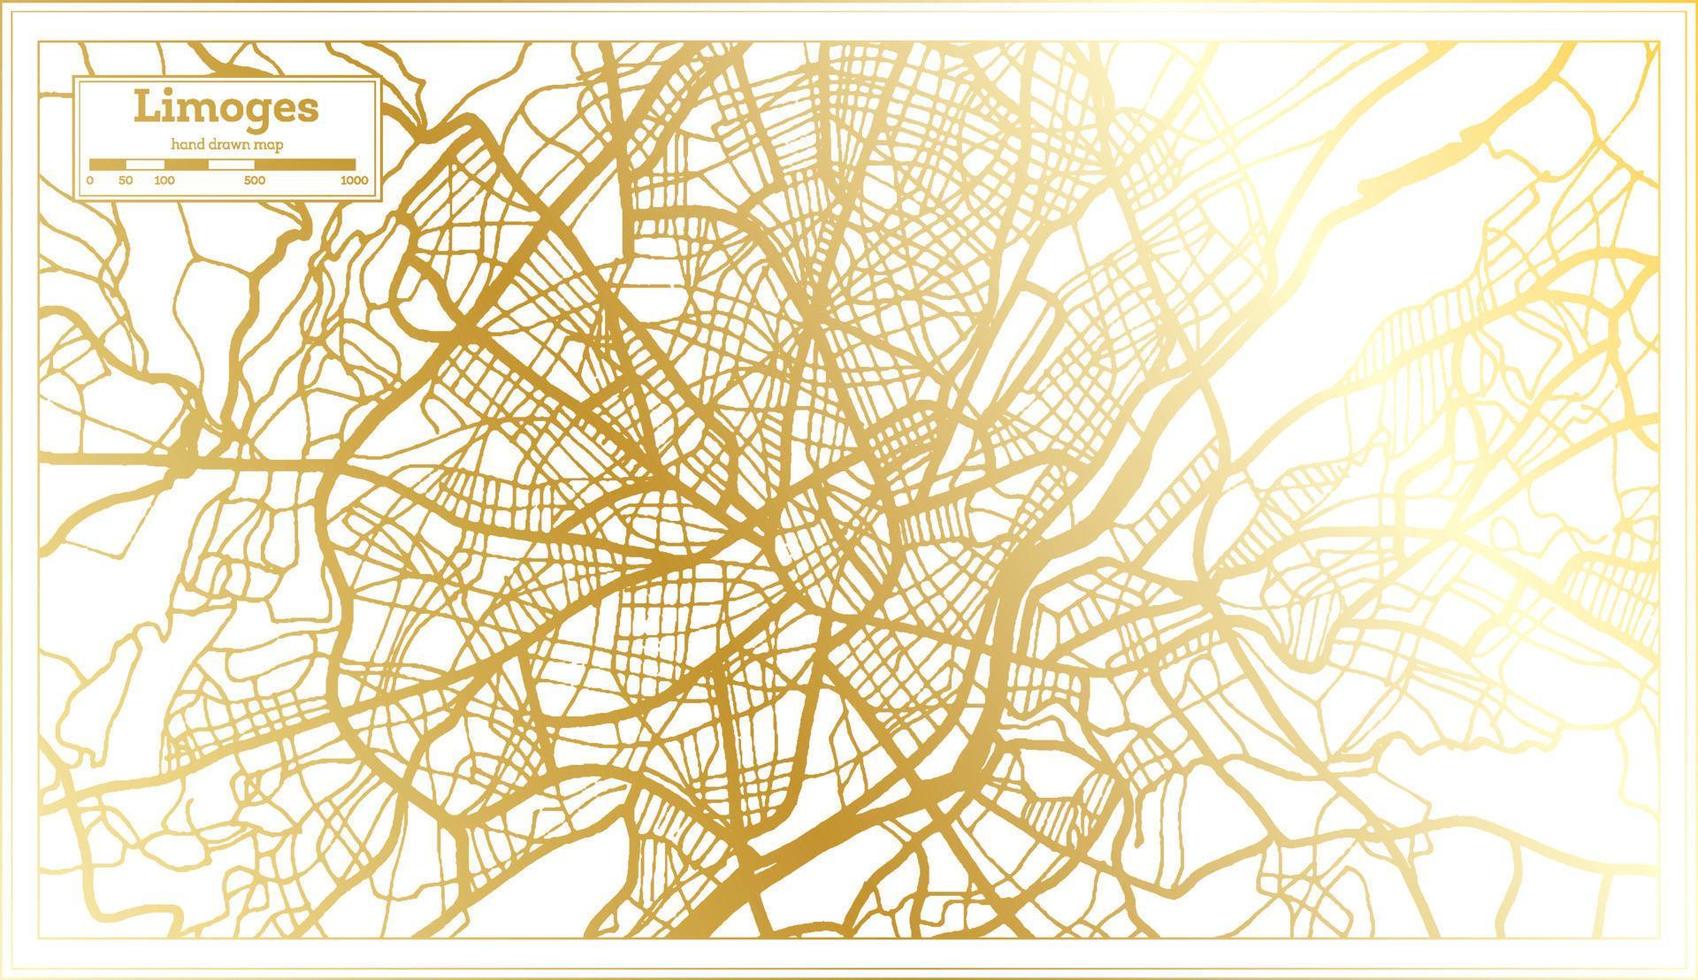 Limoges France City Map in Retro Style in Golden Color. Outline Map. vector